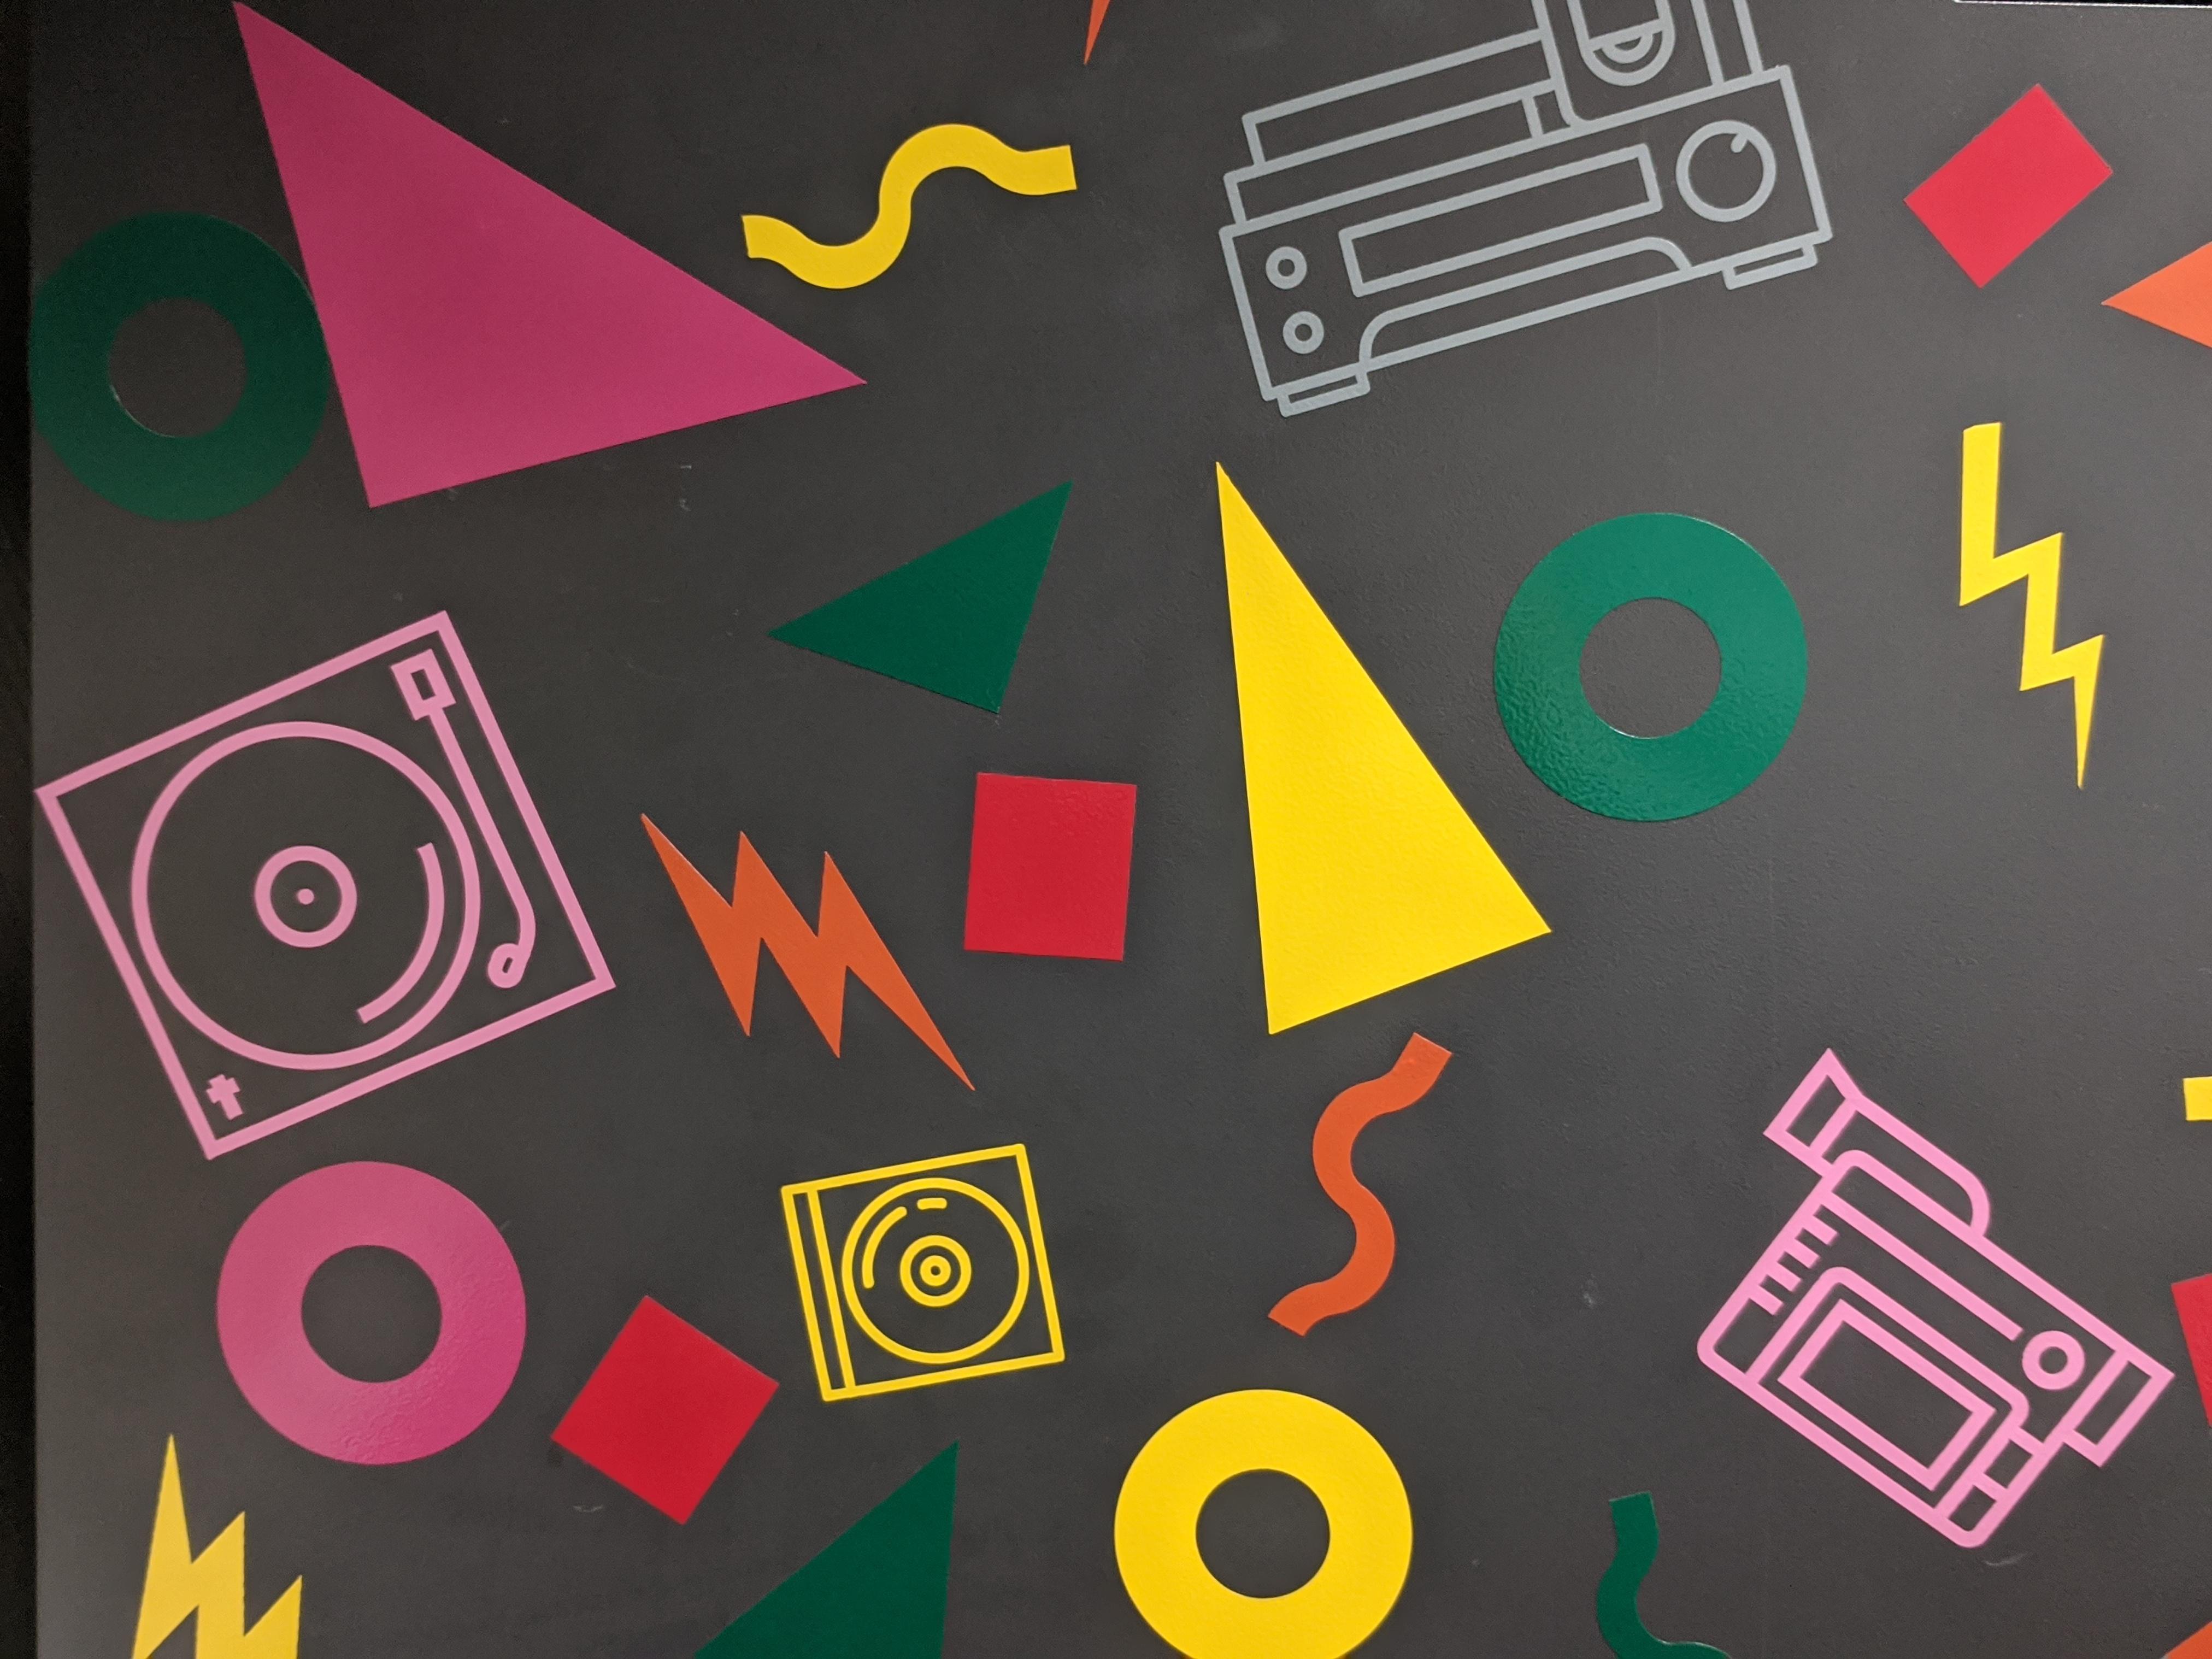 Stickers in a decorative design combining colorful shapes with media-related images such as a camera, CD, vinyl record player, etc.